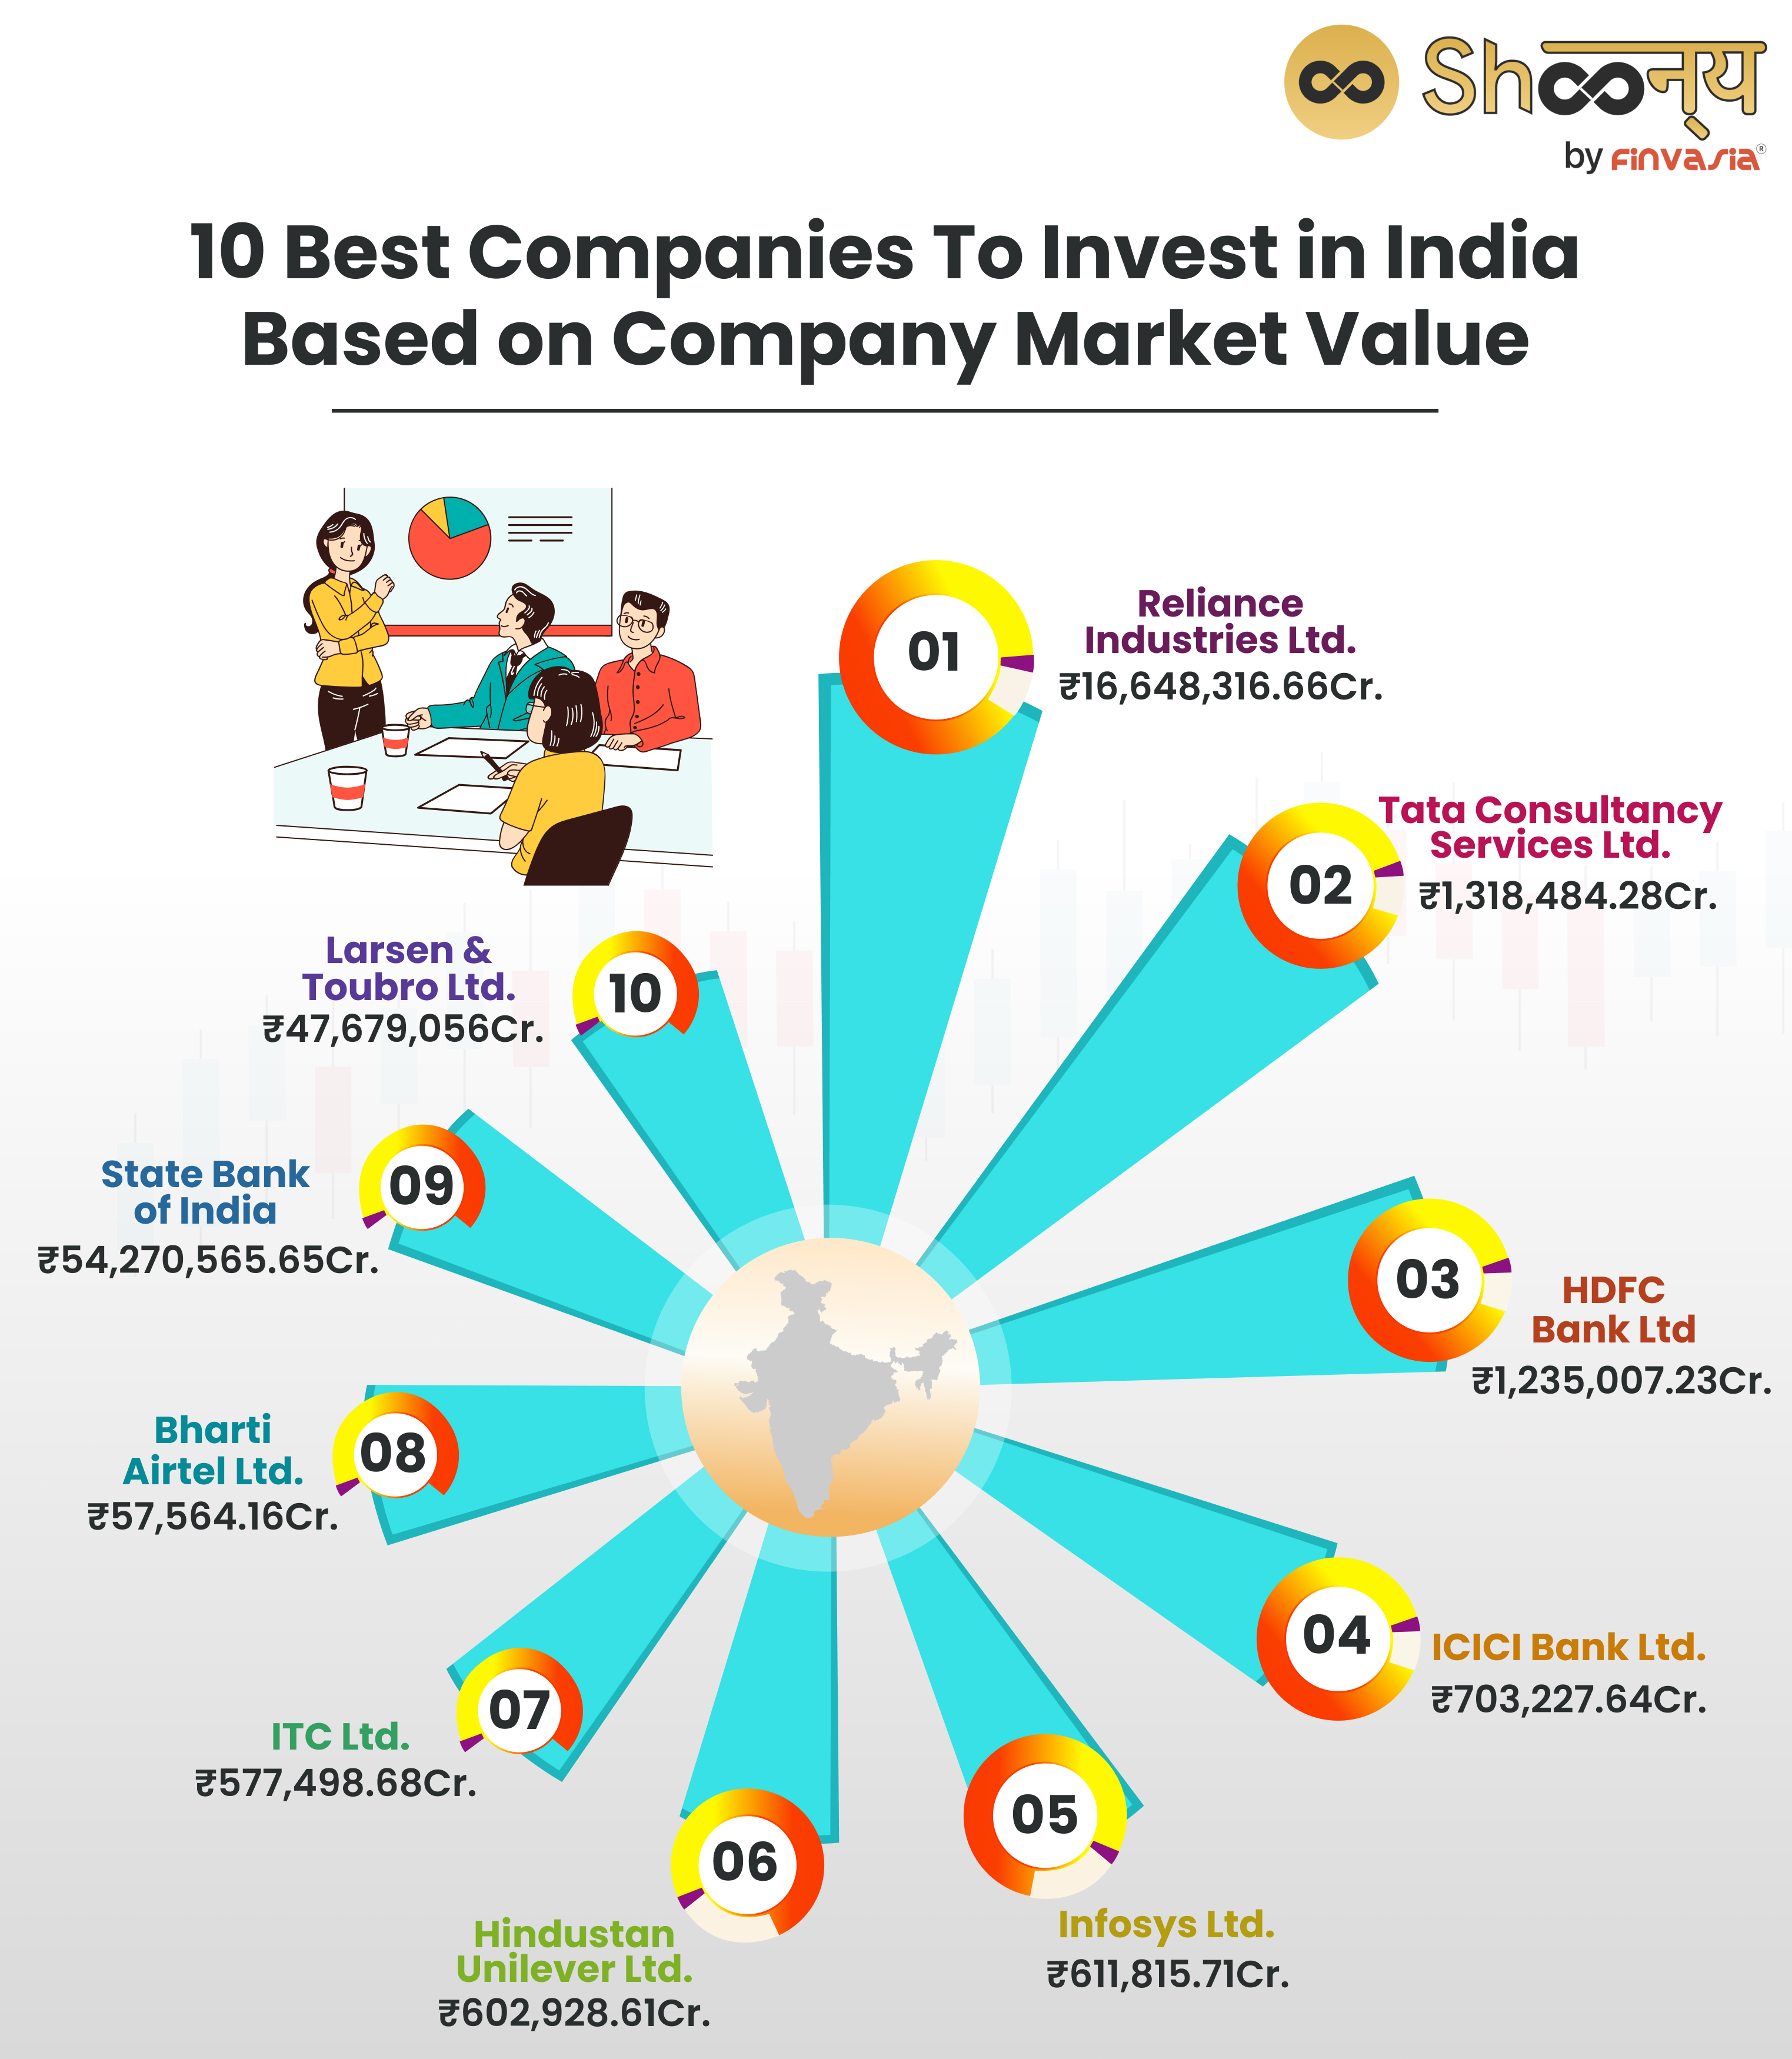 10 Best Companies To Invest in India Based on Company Market Value